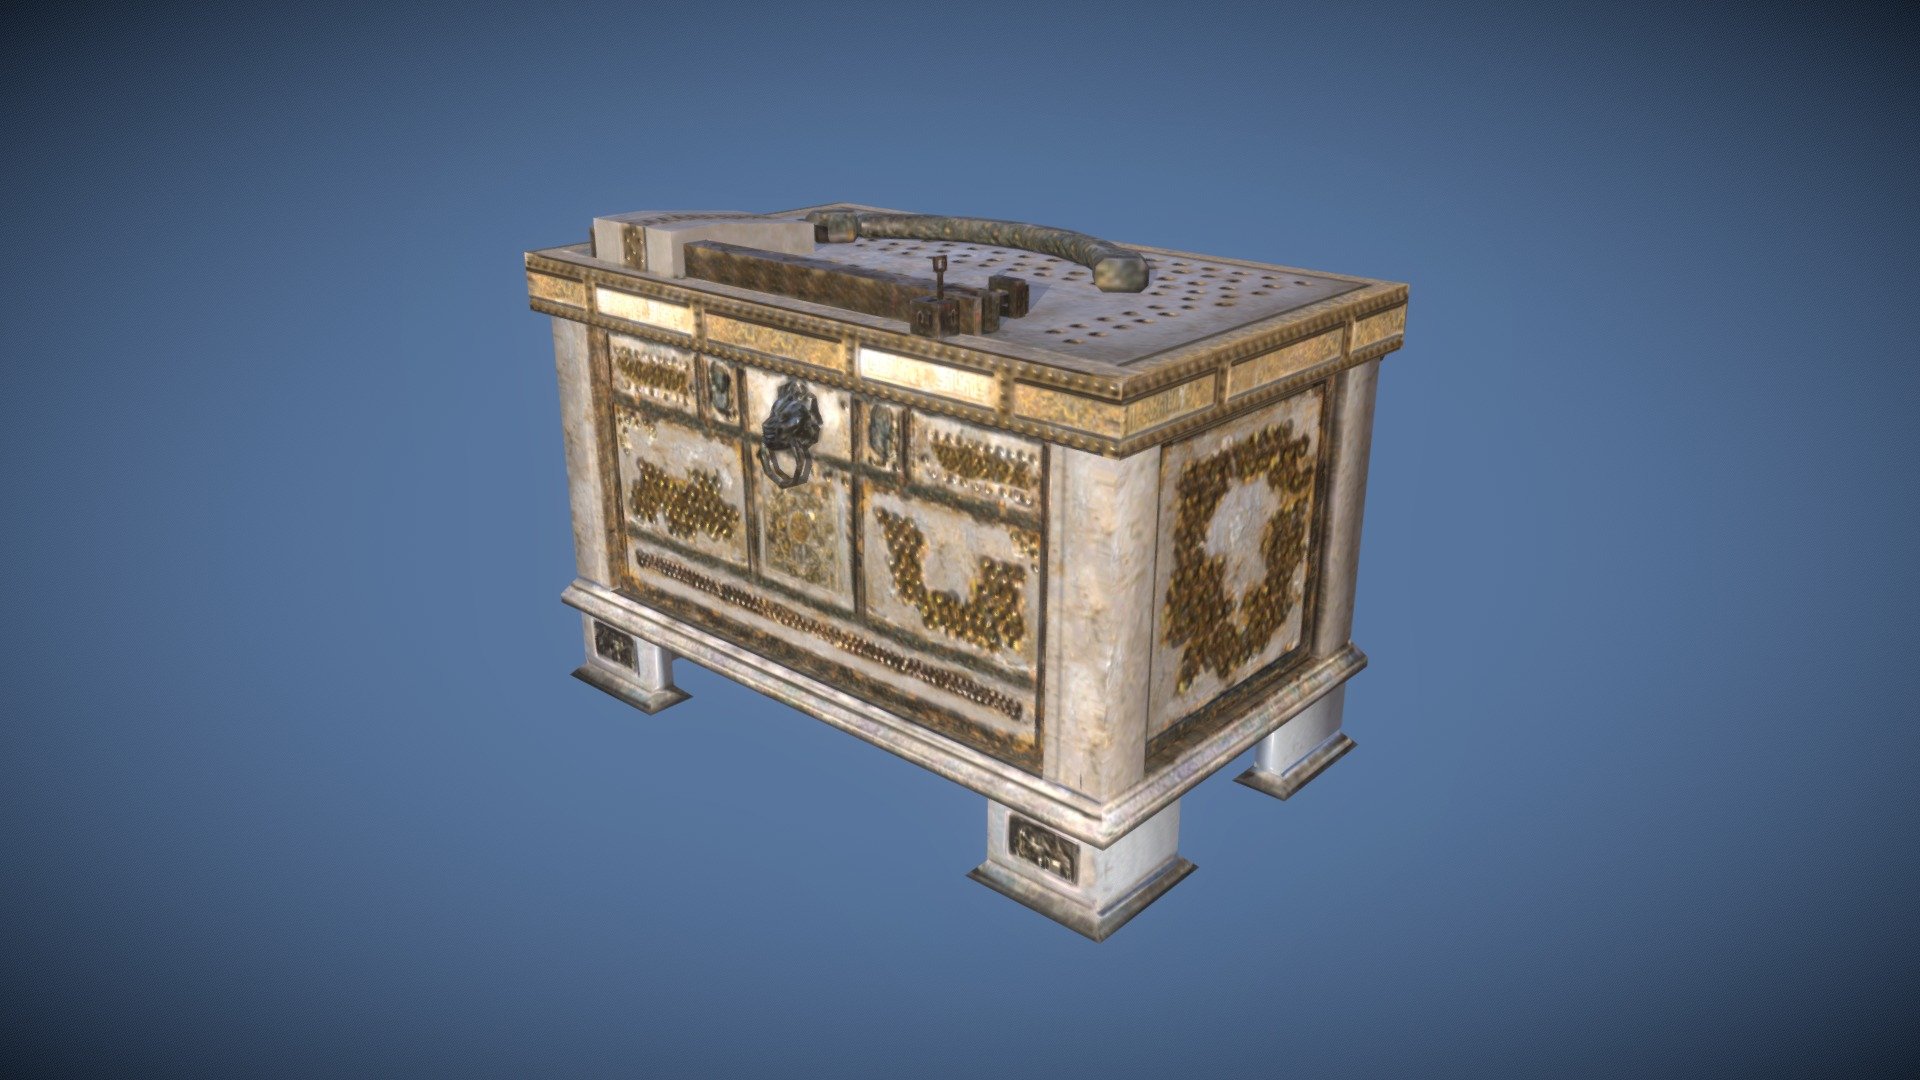 A realistic old roman style treasure chest that I built with an added locking mechanism, an animated opening sequence and gold, lots of gold.

Useable for games, VR, architectural and historical settings 3d model